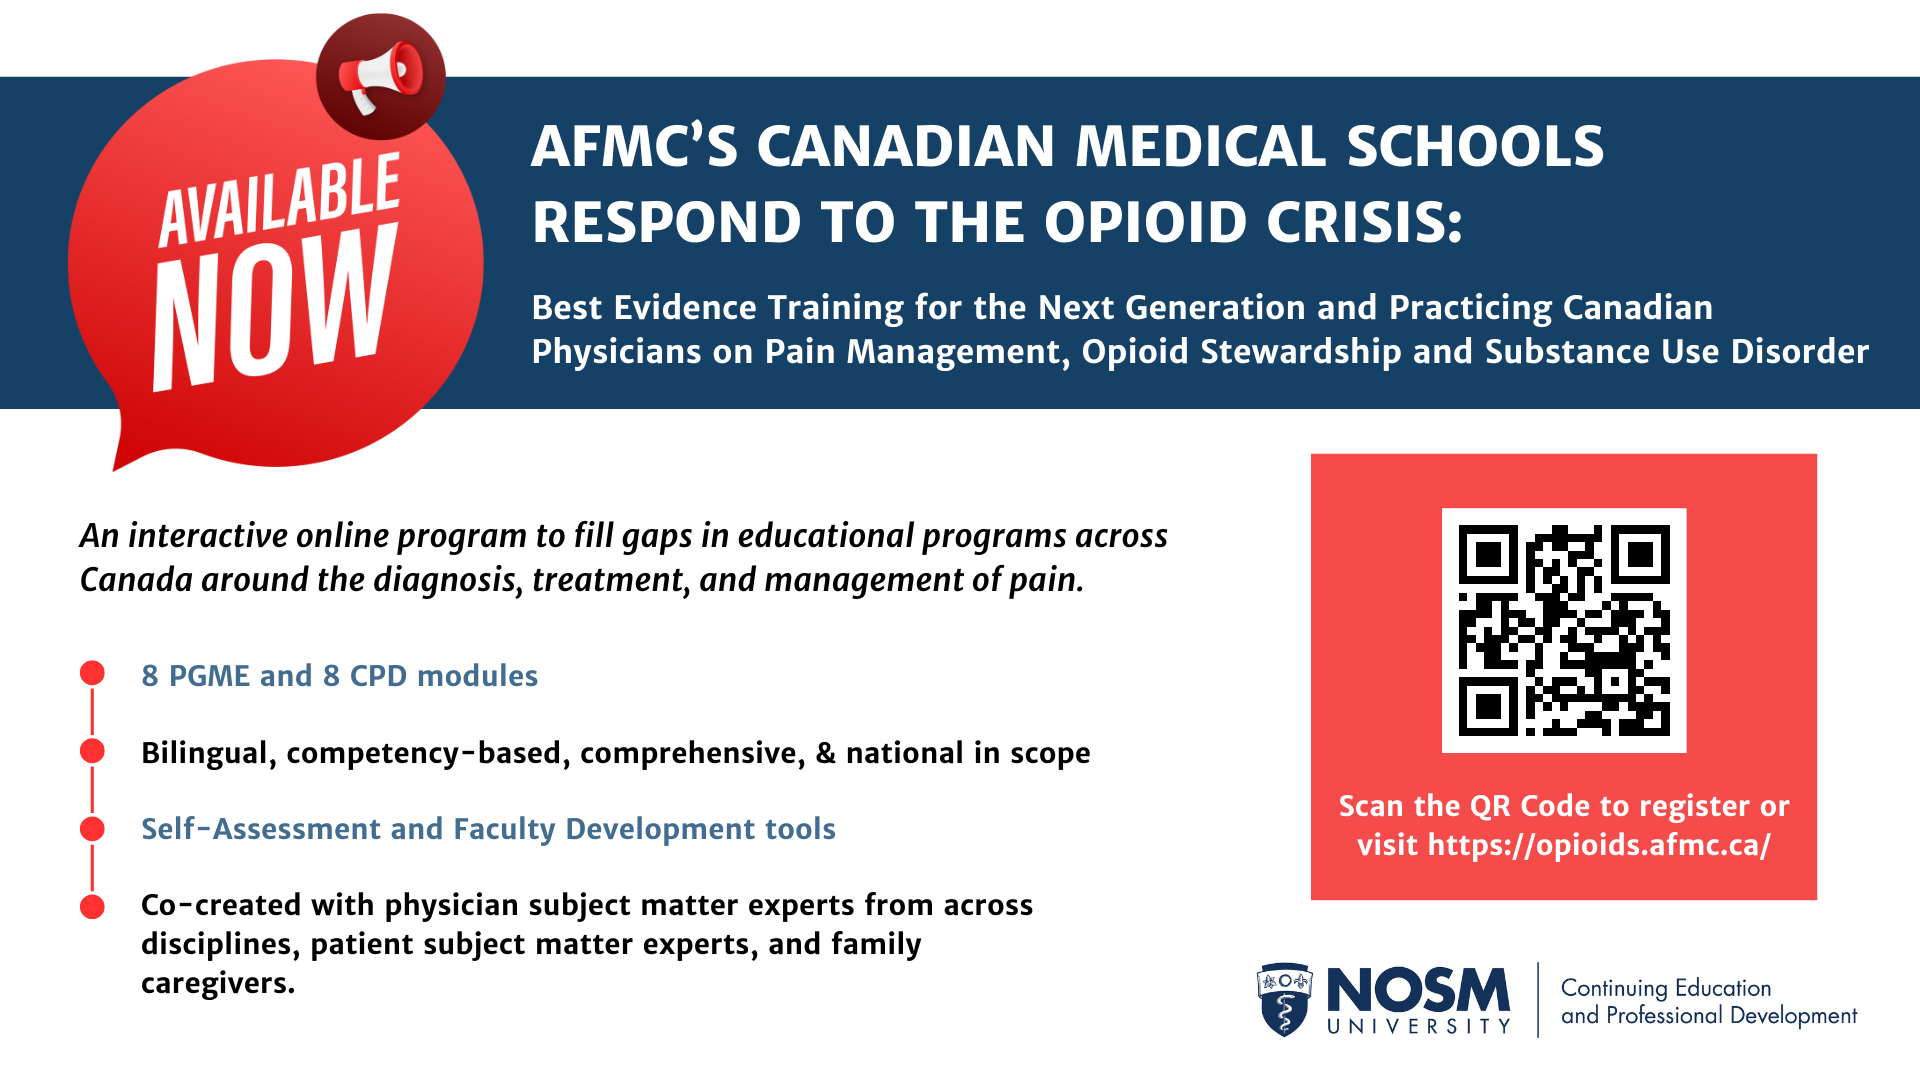 AFMC's Canadian Medical Schools Respond to the Opioid Crisis